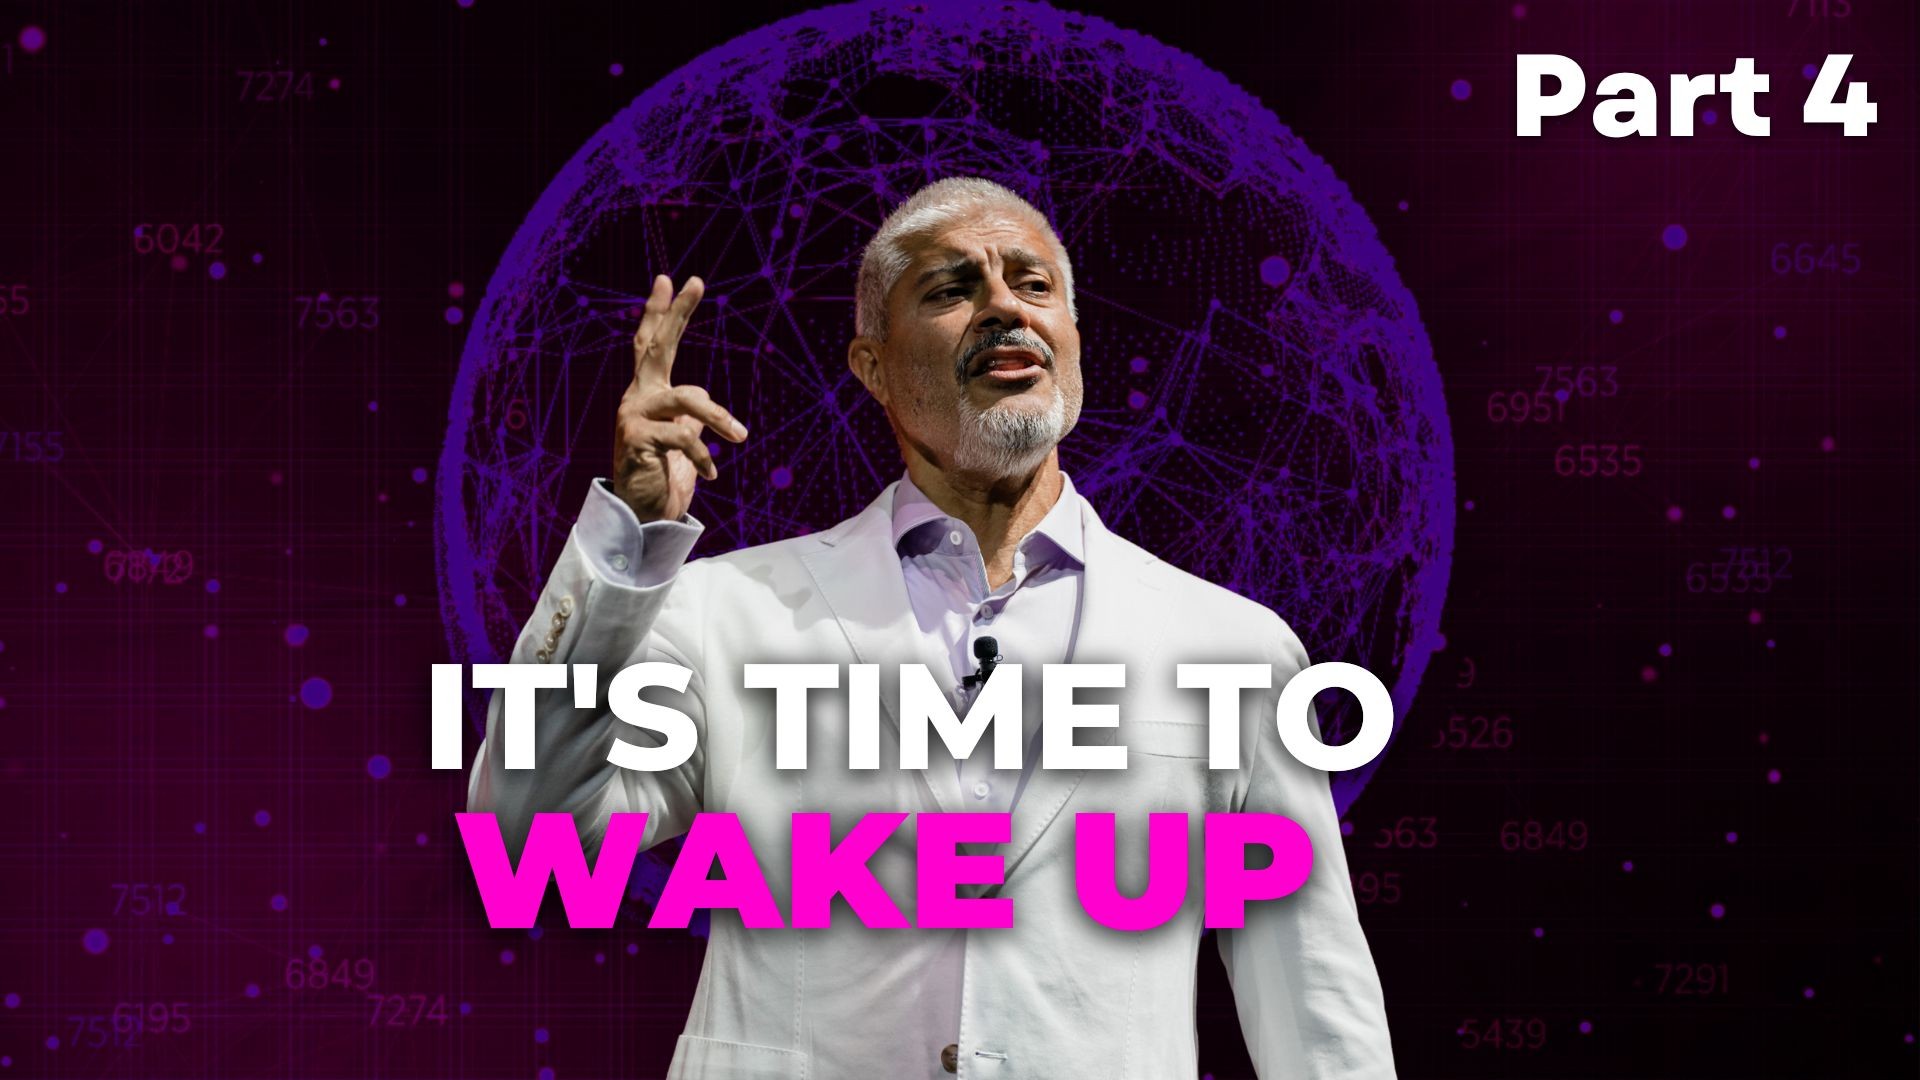 â�£It's Time To Wake Up (Part 4 of 4) - Dr Rashid A Buttar